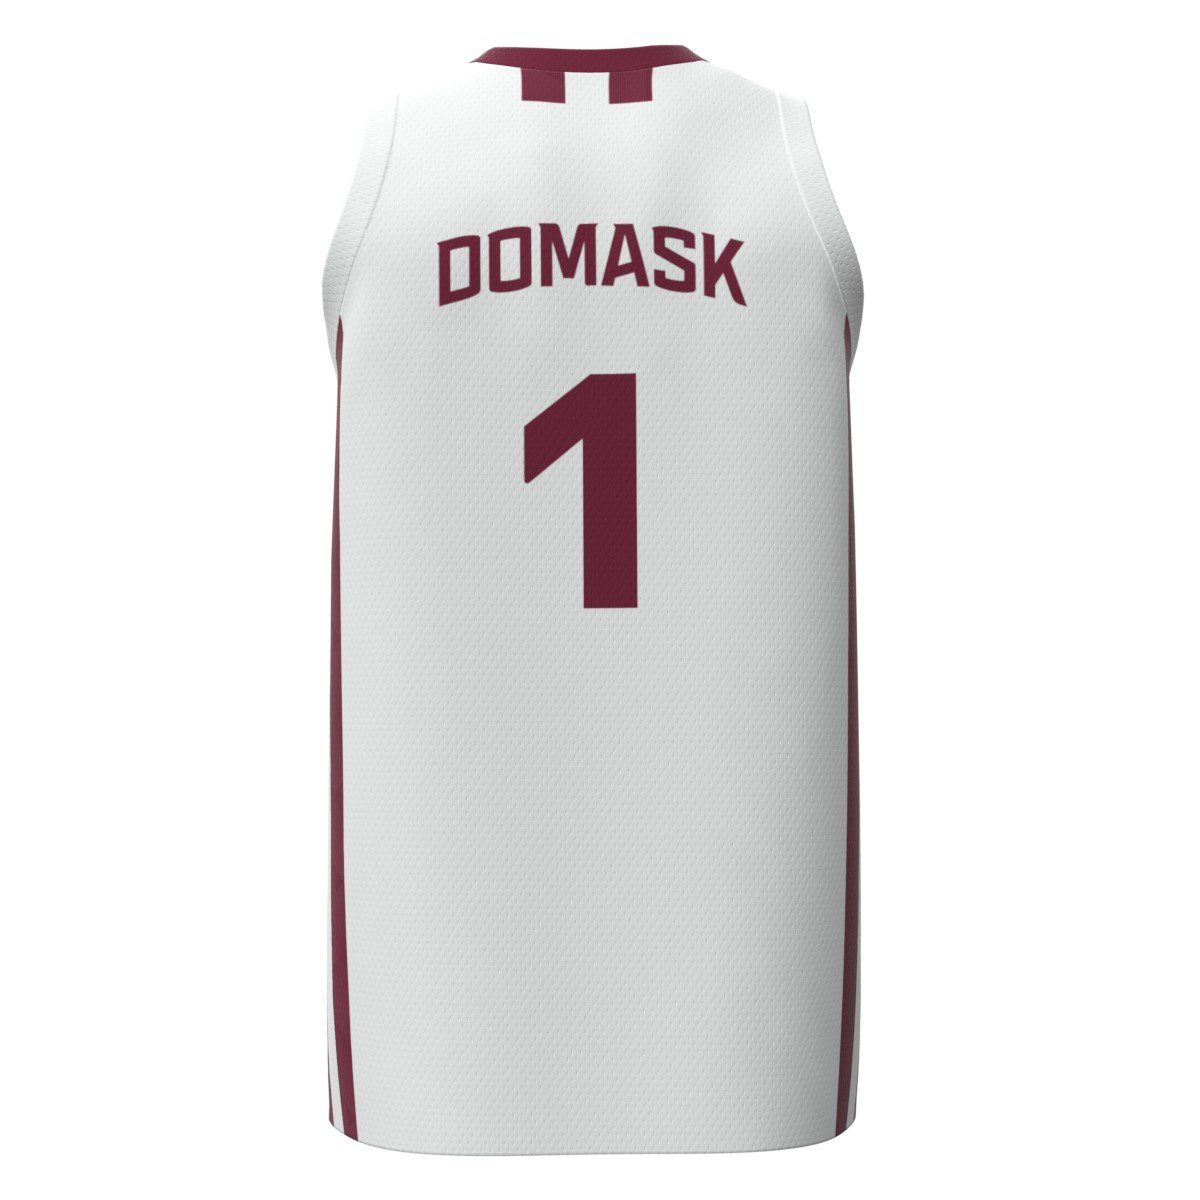 Marcus Domask SIU Replica White Jersey Back